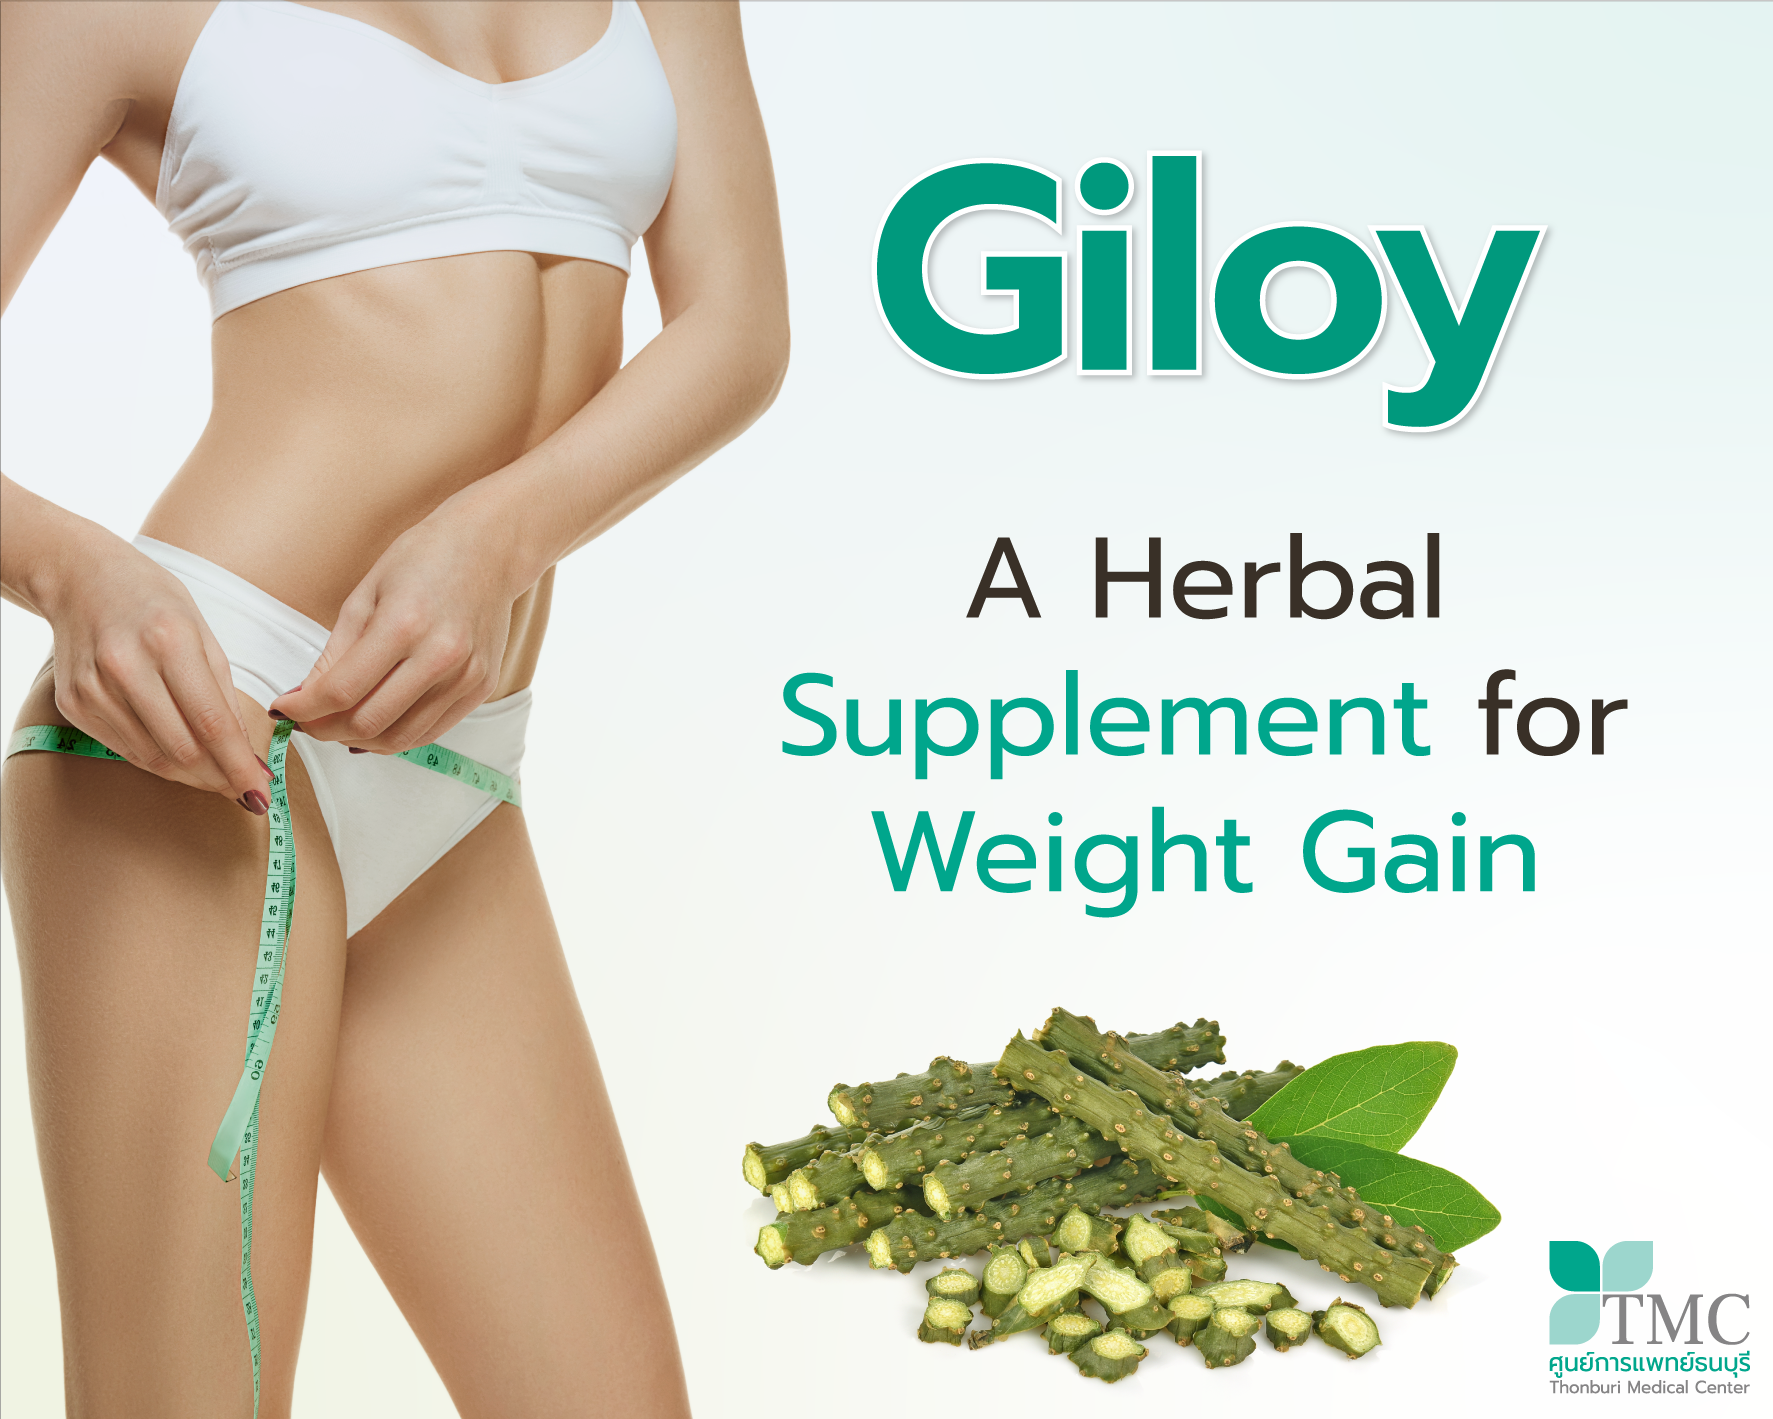 Giloy - A Herbal Supplement for Weight Gain